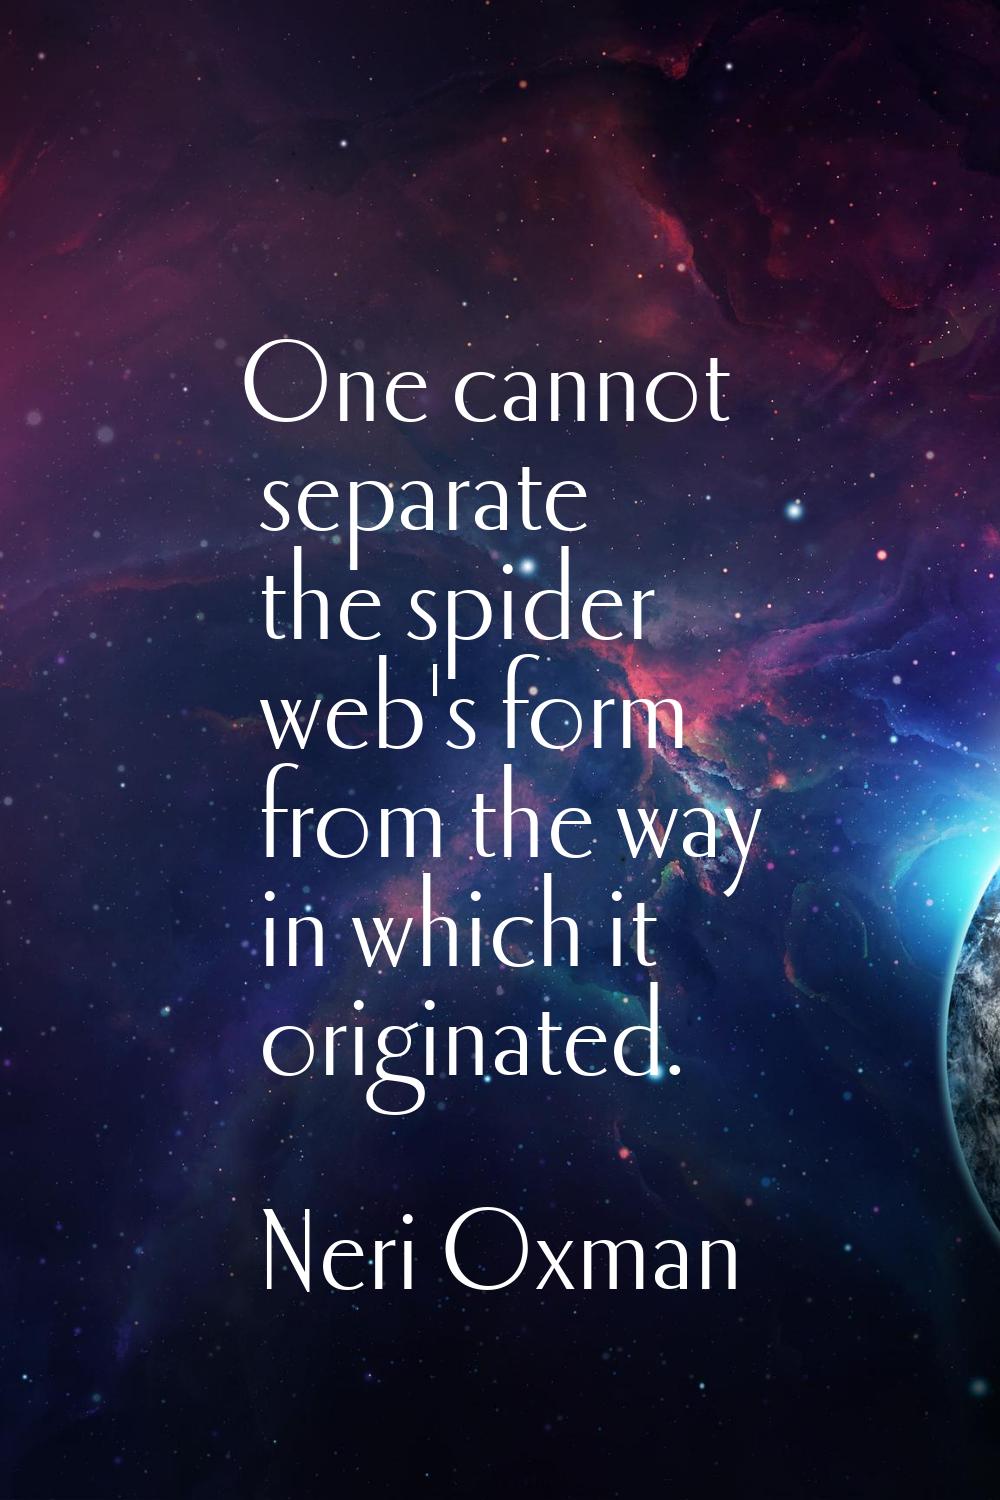 One cannot separate the spider web's form from the way in which it originated.